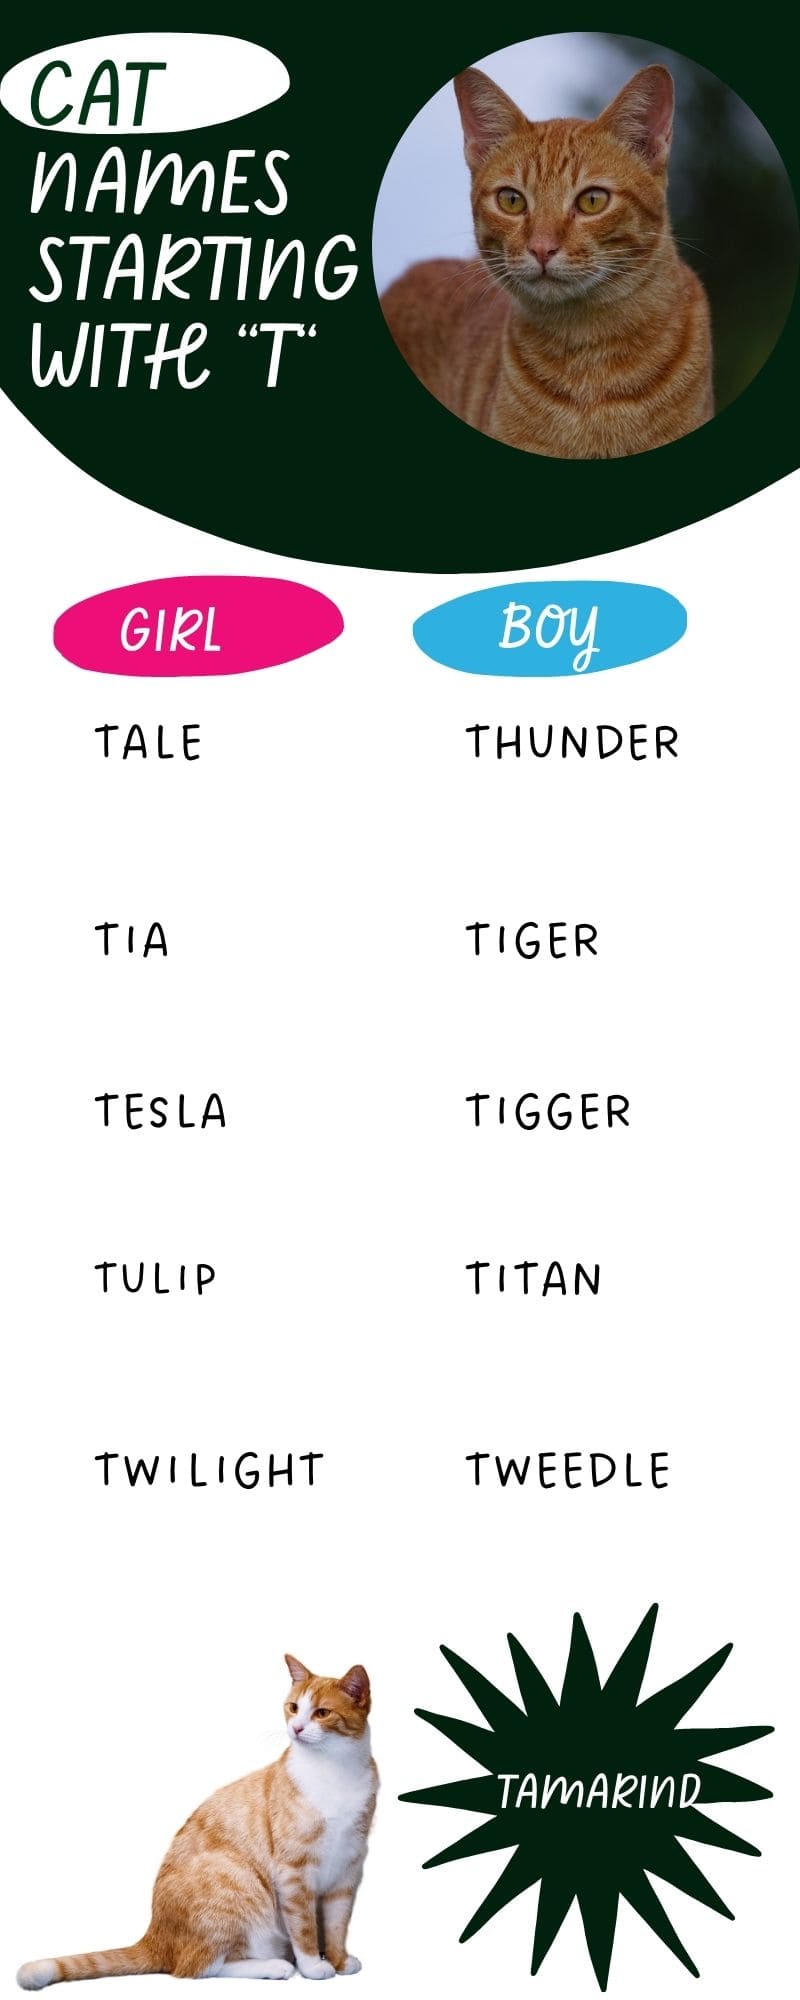 This infographic shows a list of 11 cat names which start with T